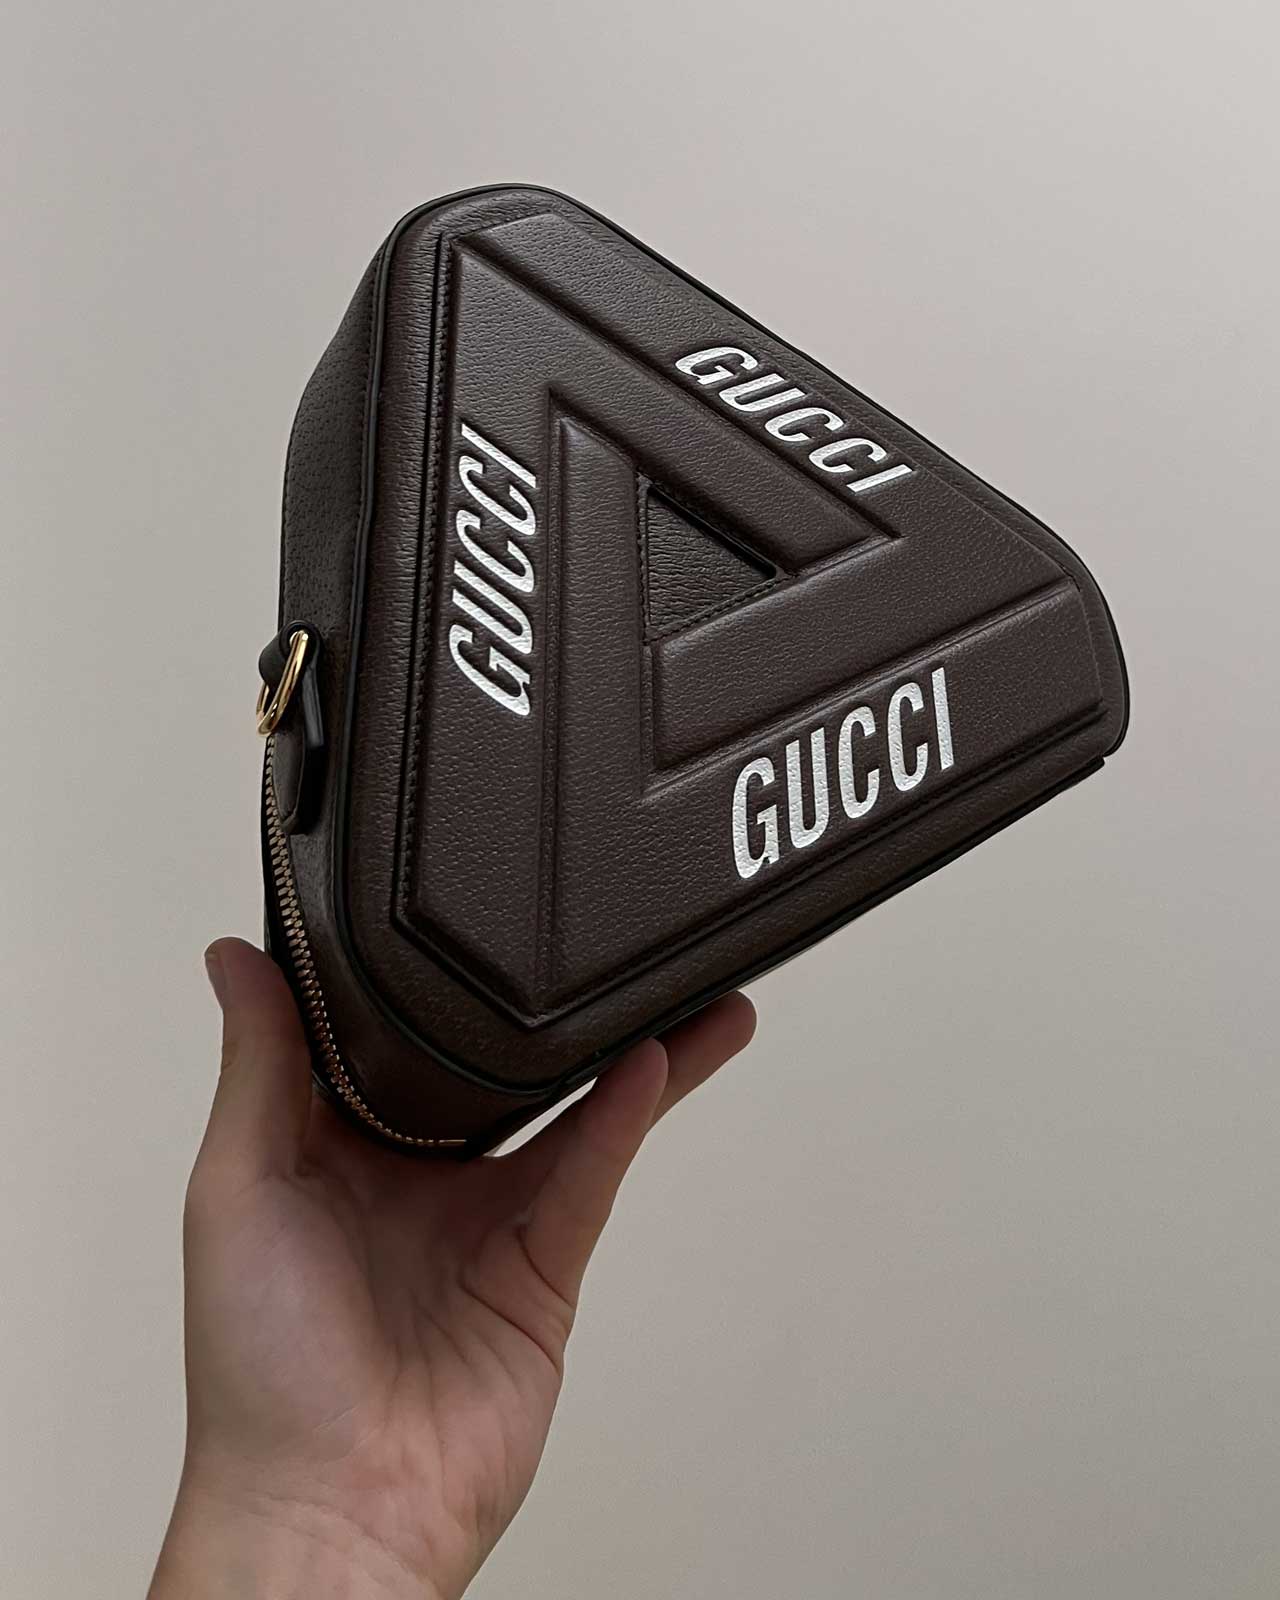 Everything You Need To Know About The Super-Hypey Palace Gucci Collaboration